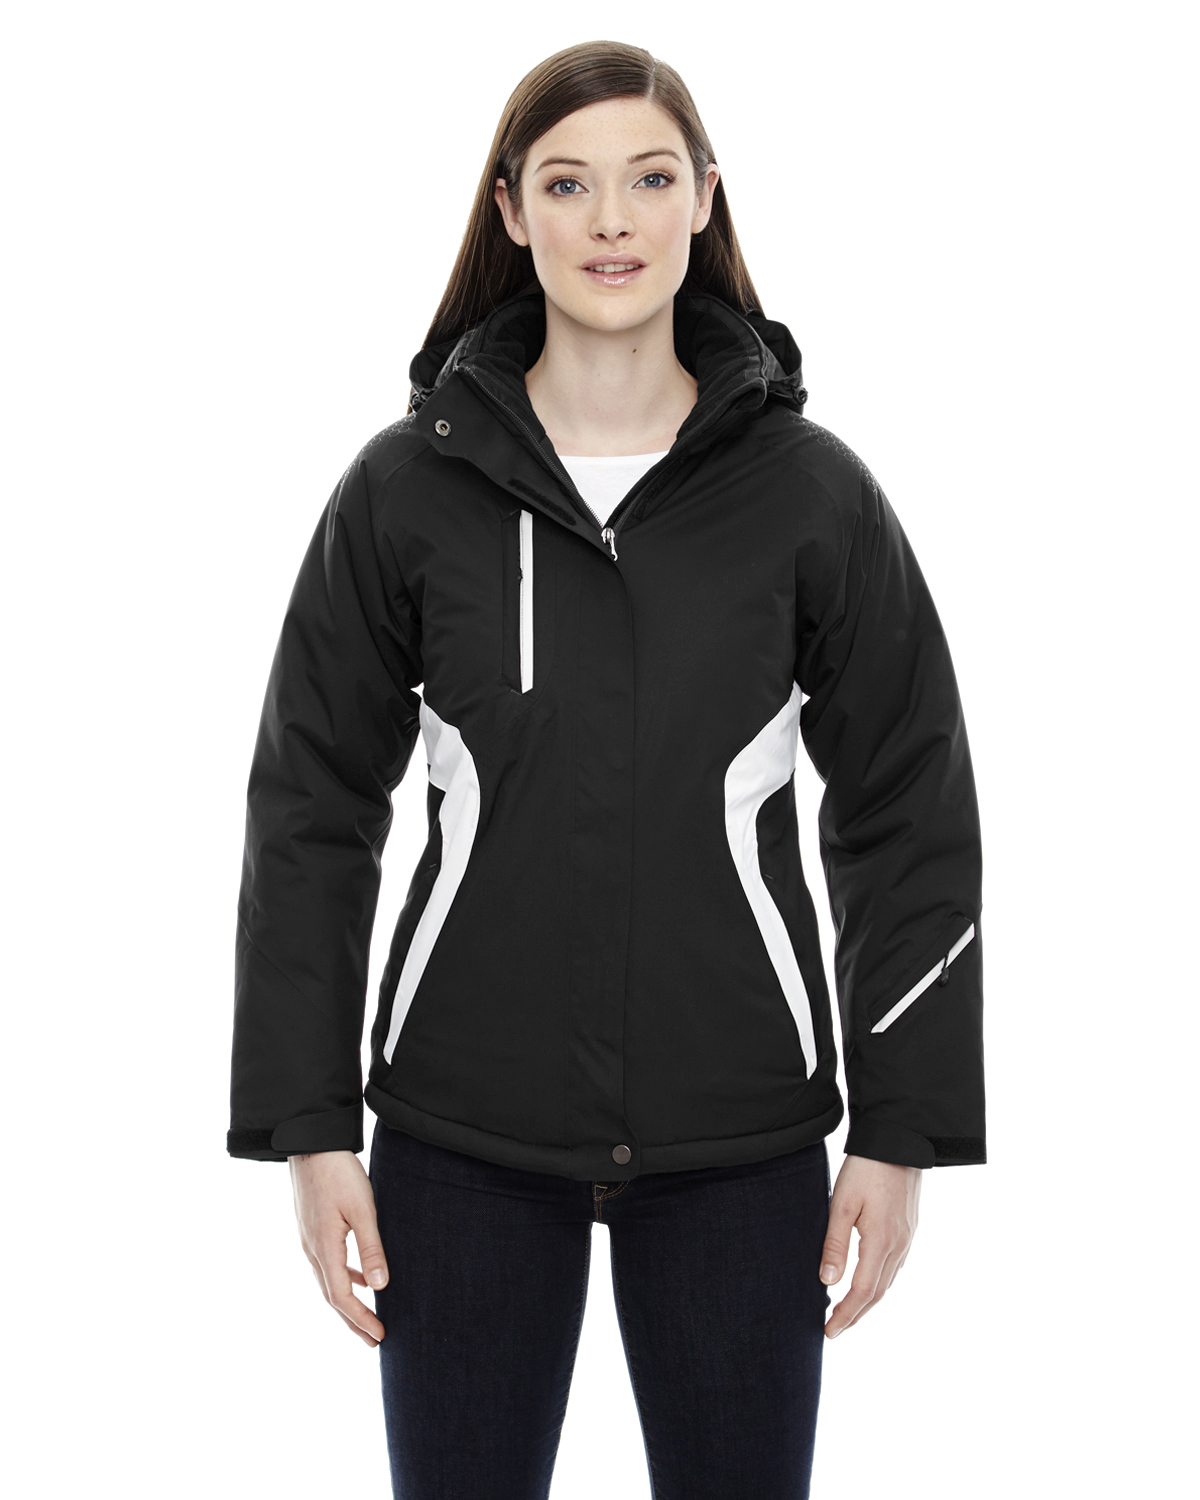 A Product of Ash City - North End Ladies' Apex Seam-Sealed Insulated Jacket - BLACK 703 - L [Saving and Discount on bulk, Code Christo] - image 1 of 2